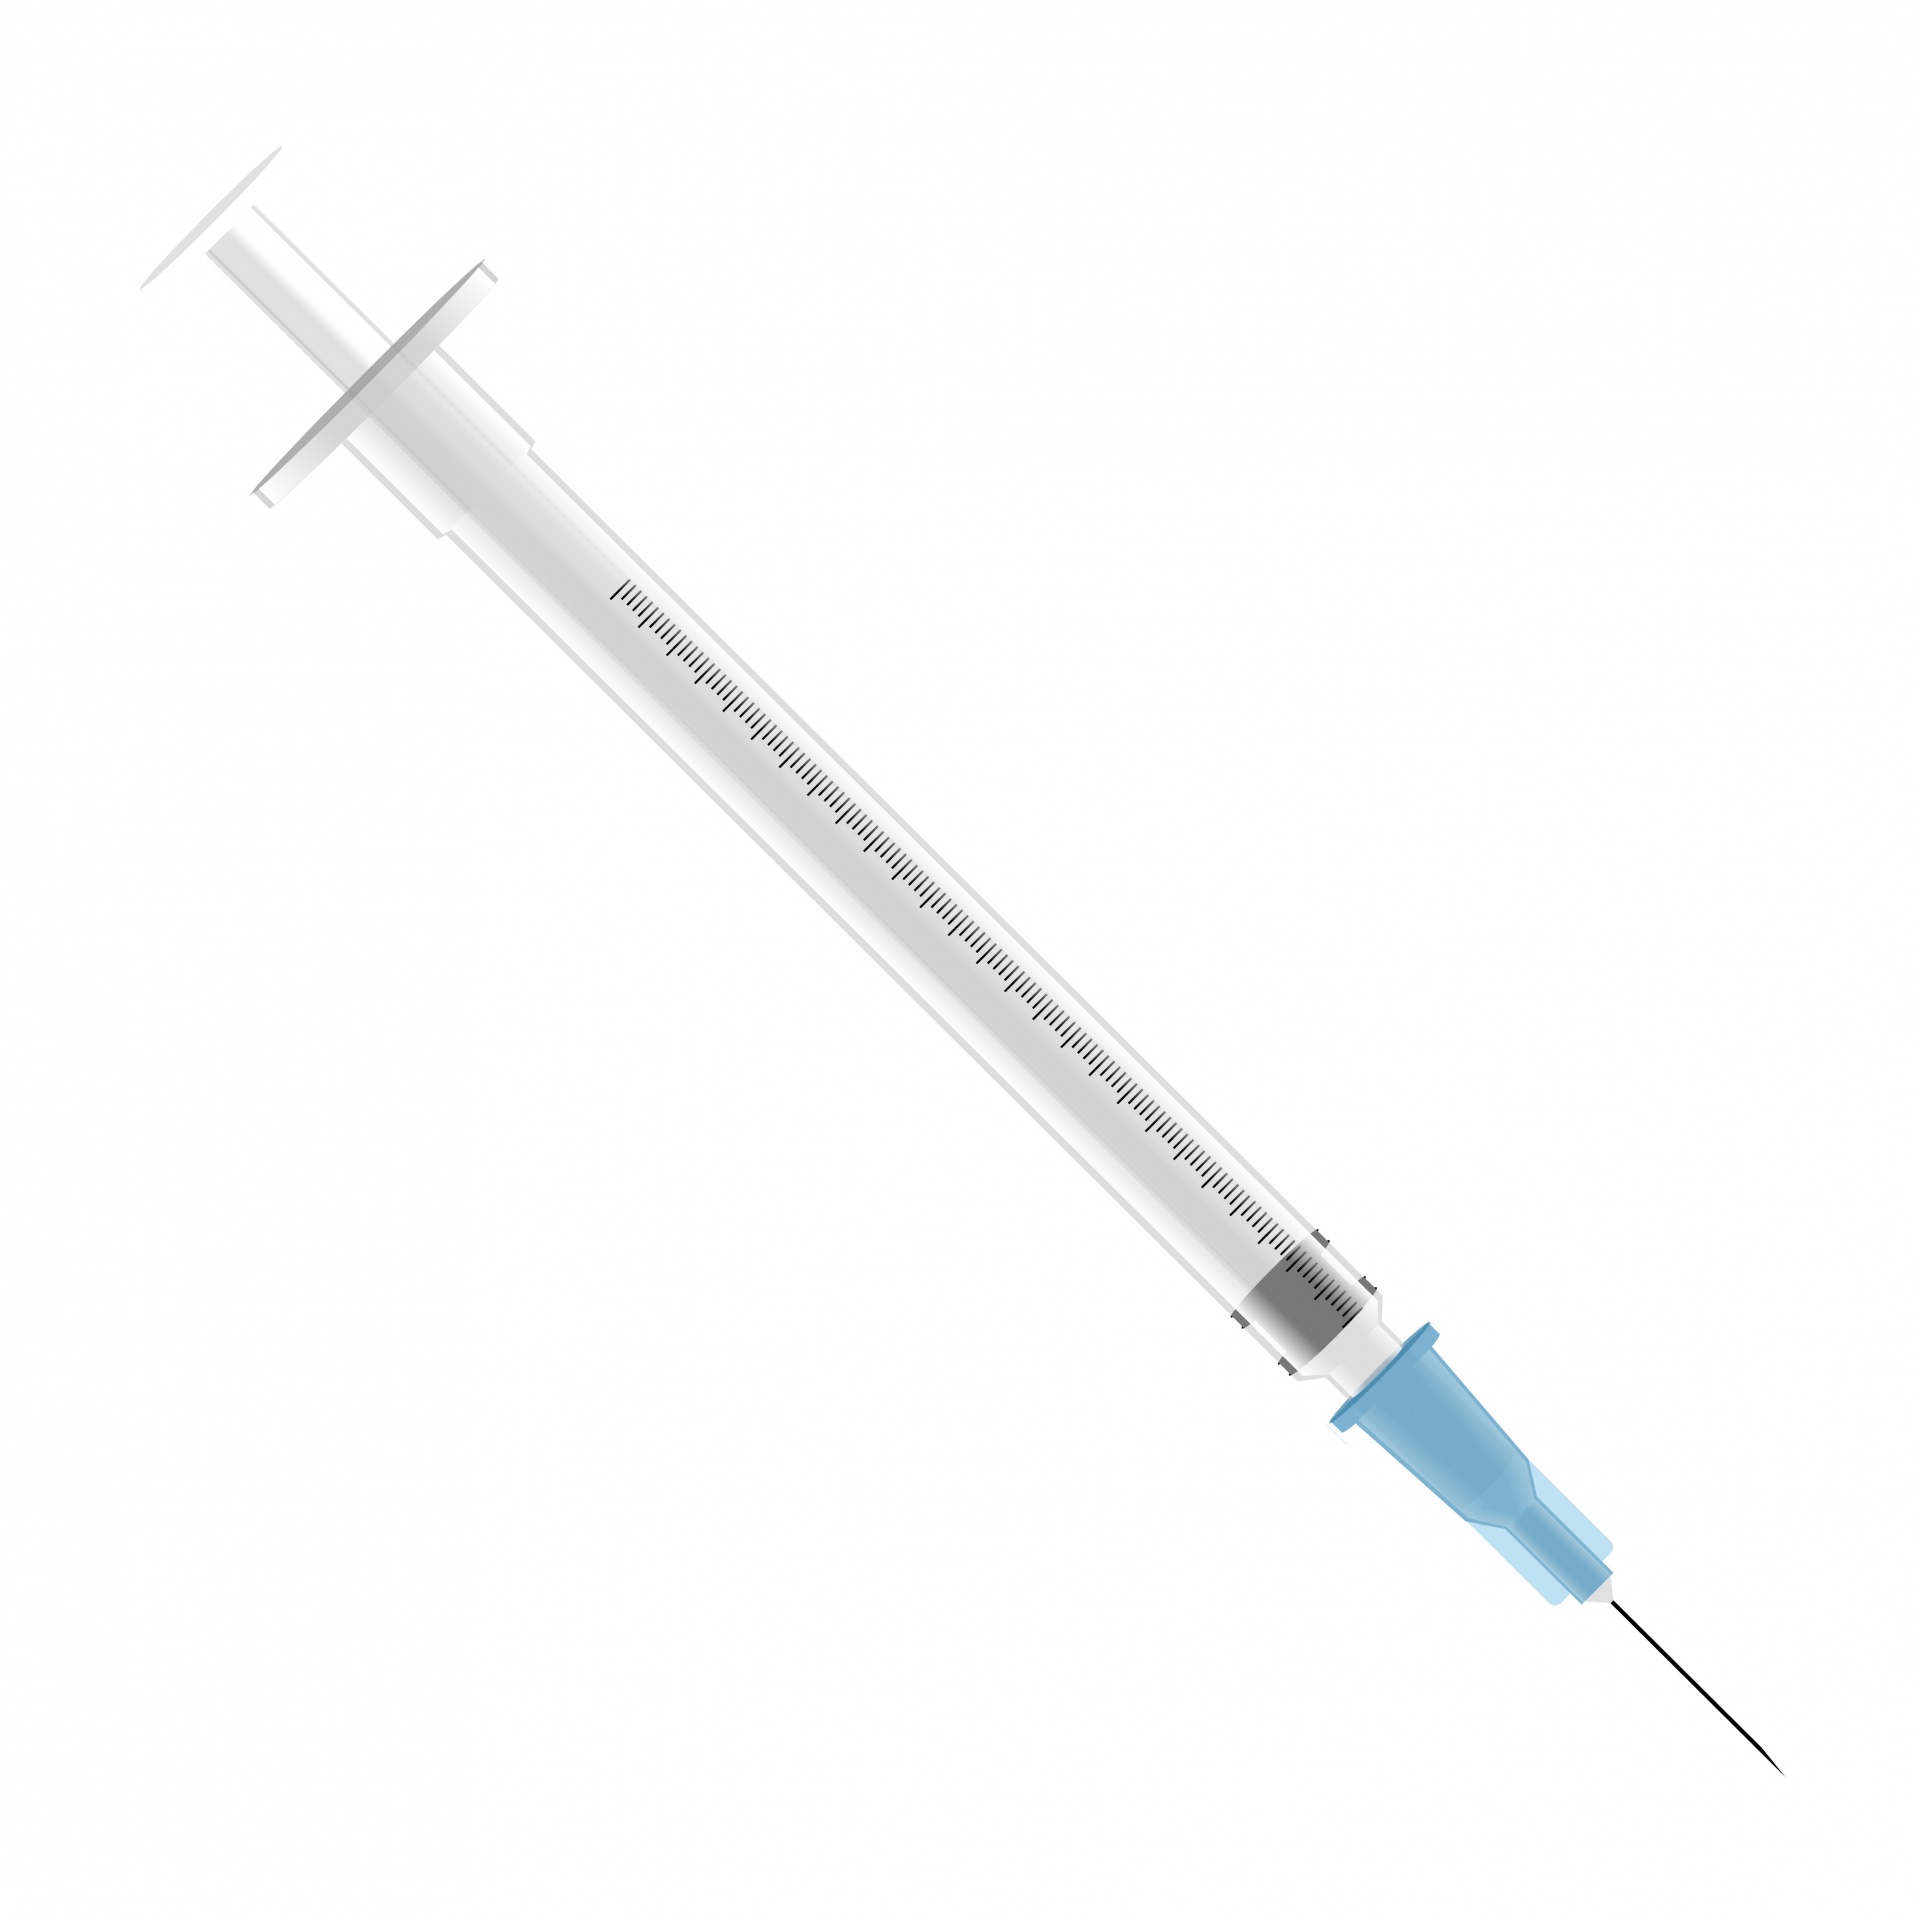 Vector illustration of a syringe with hypodermic needle for vaccination, injection clipart on white background